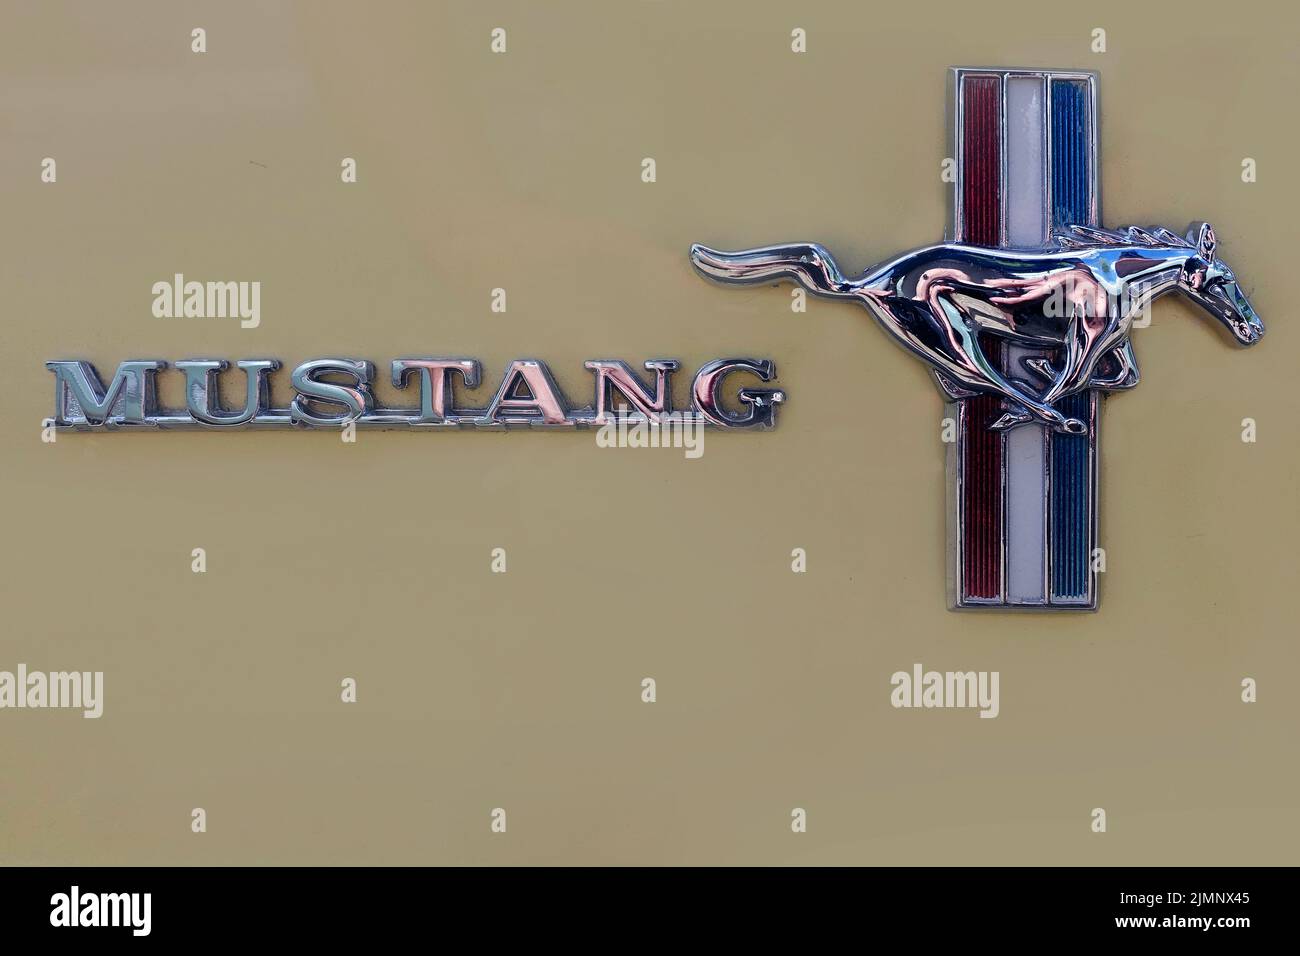 Ford, Mustang, badge, logo, voiture classique Banque D'Images